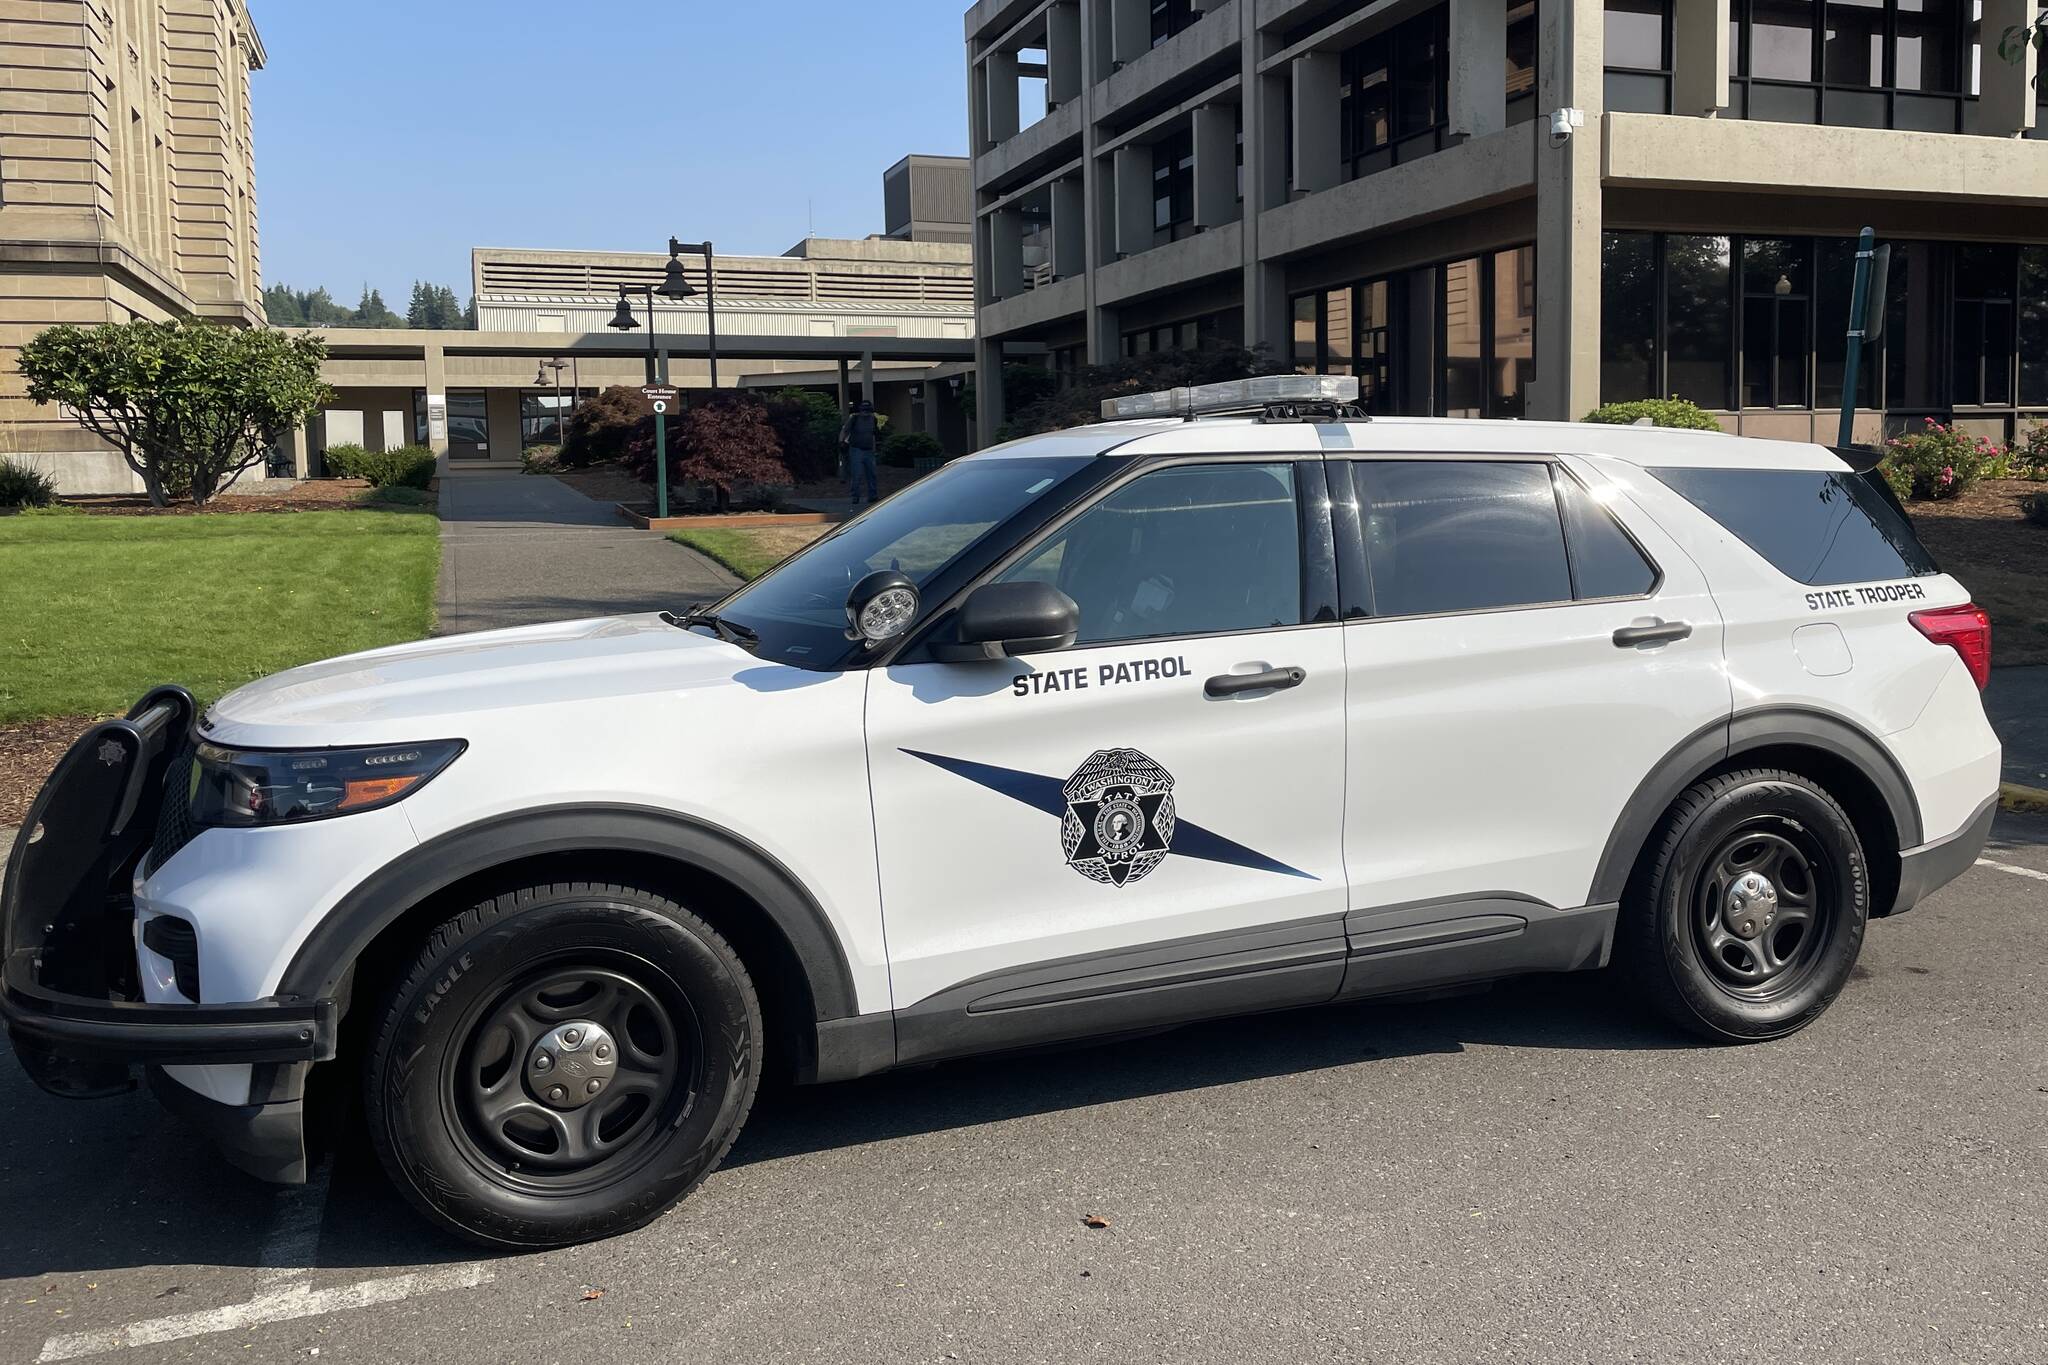 A 40-year-old man was killed in a single-vehicle crash on Monday, according to the Washington State Patrol. (Michael S. Lockett | The Daily World file)